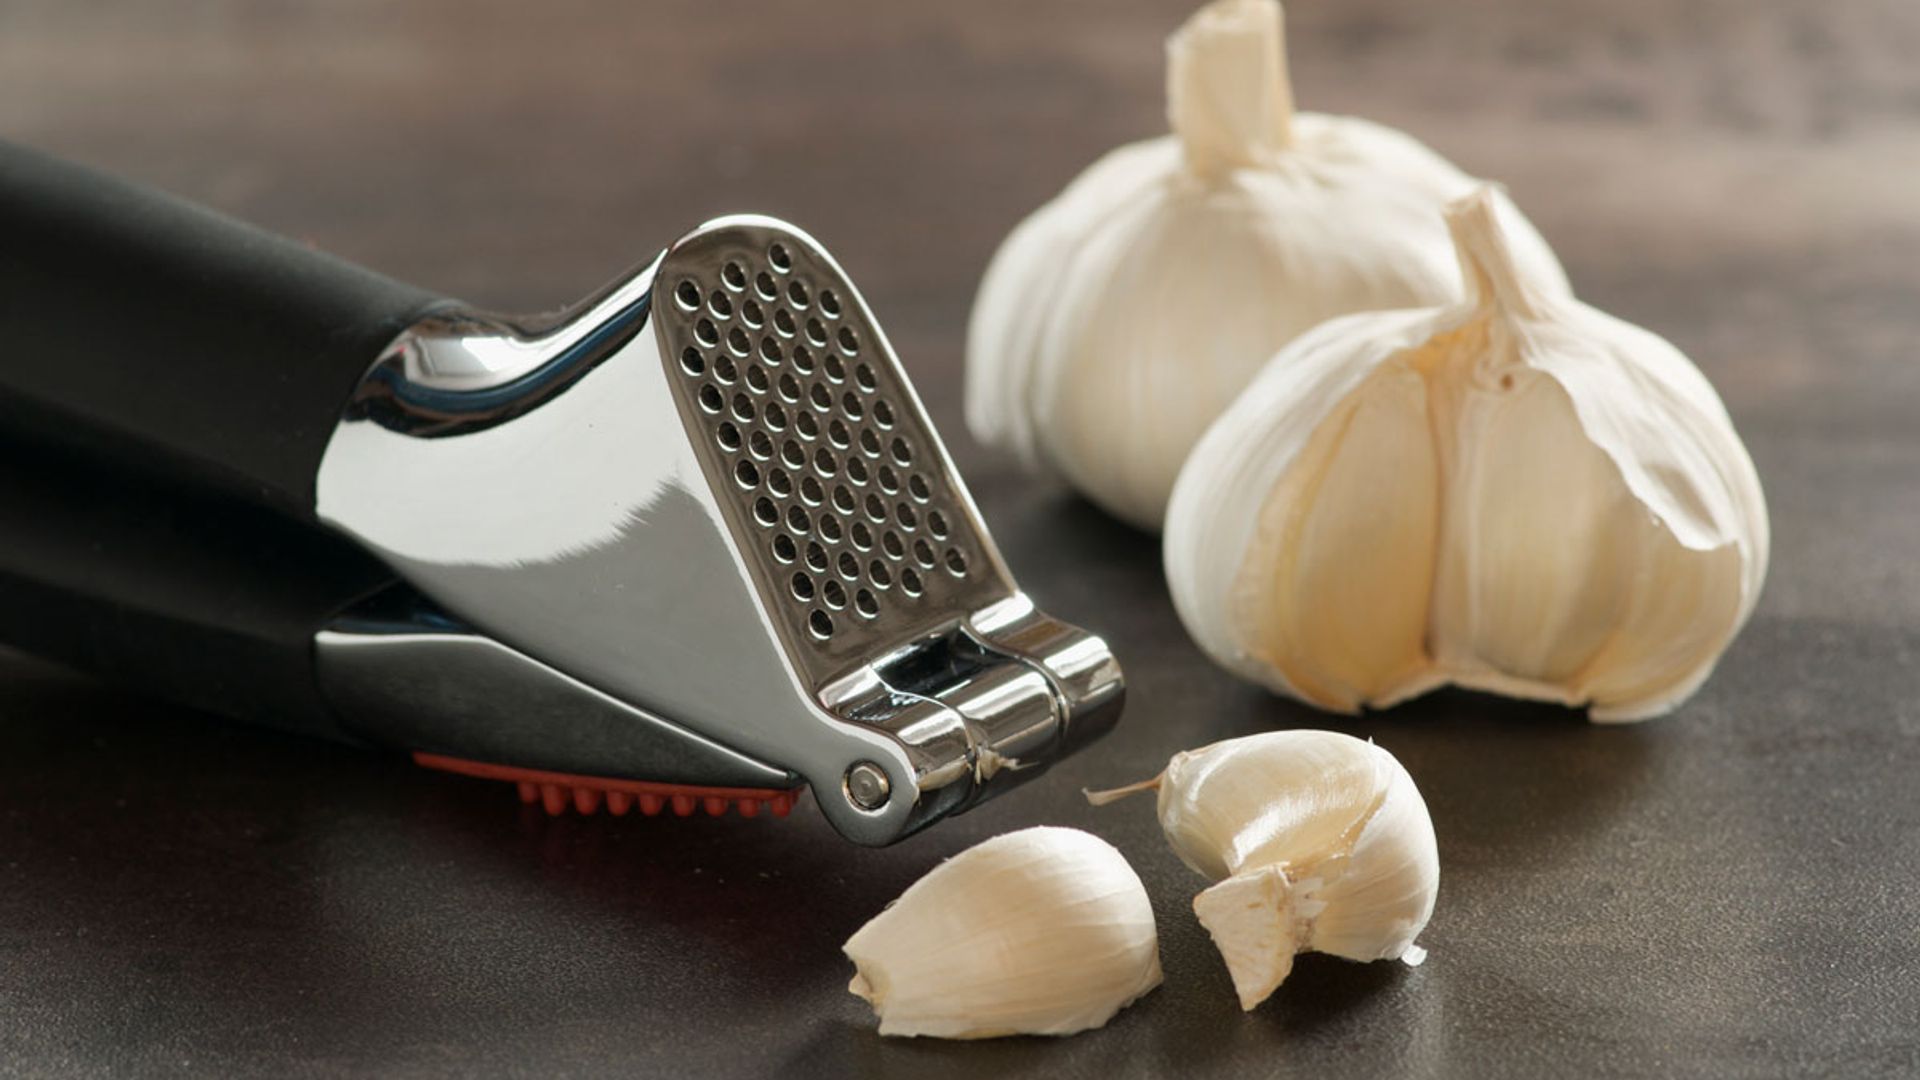 This garlic press has over 24k positive reviews on Amazon and it's 47% off in the sale